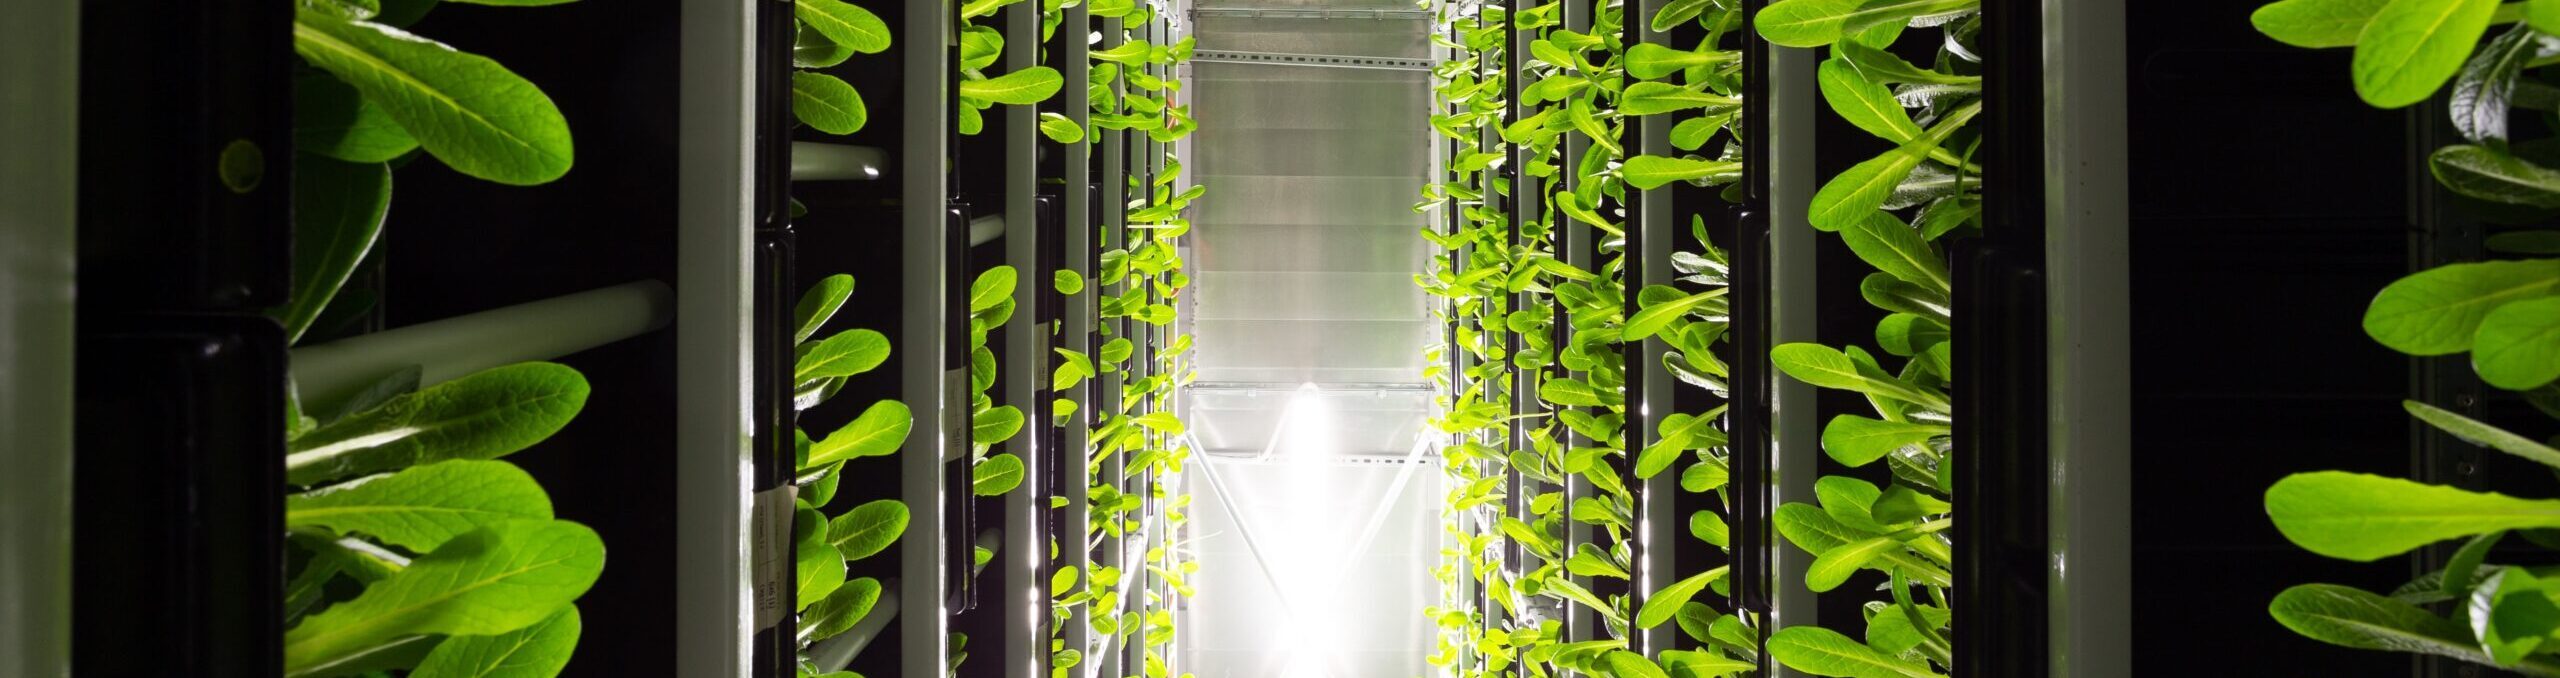 US (NY): City of Glens Falls making the case for indoor farming in vacant buildings